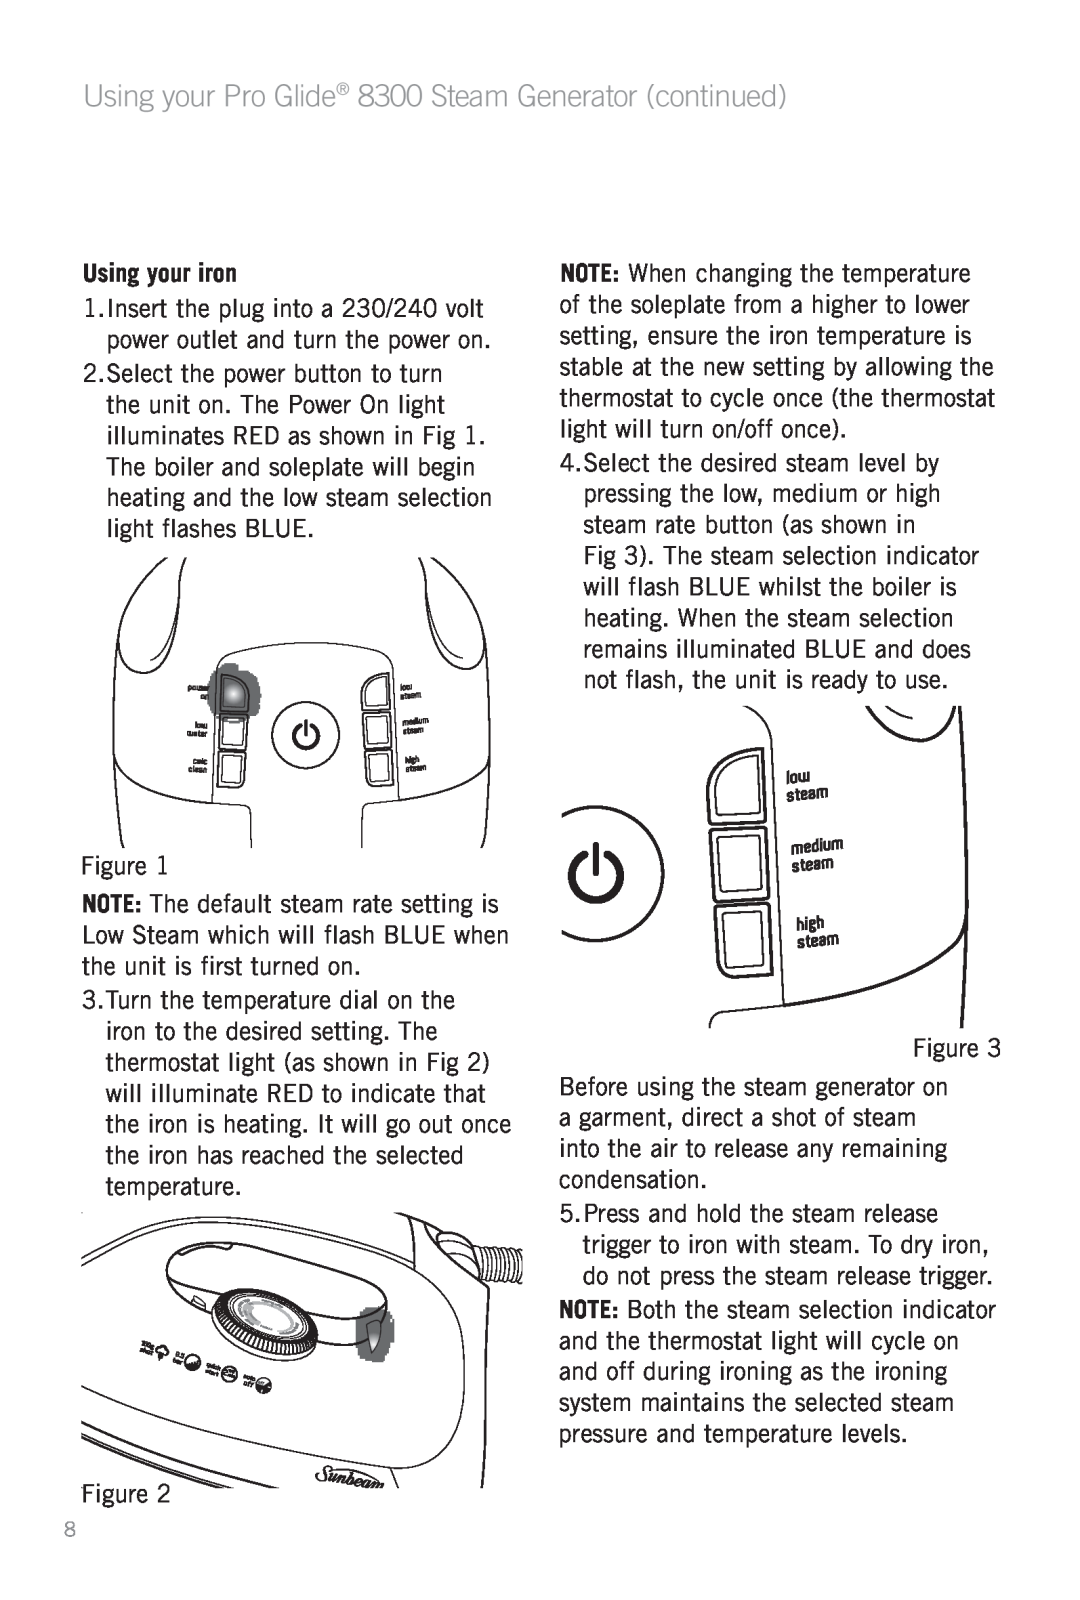 Sunbeam manual Using your Pro Glide 8300 Steam Generator continued, Using your iron 